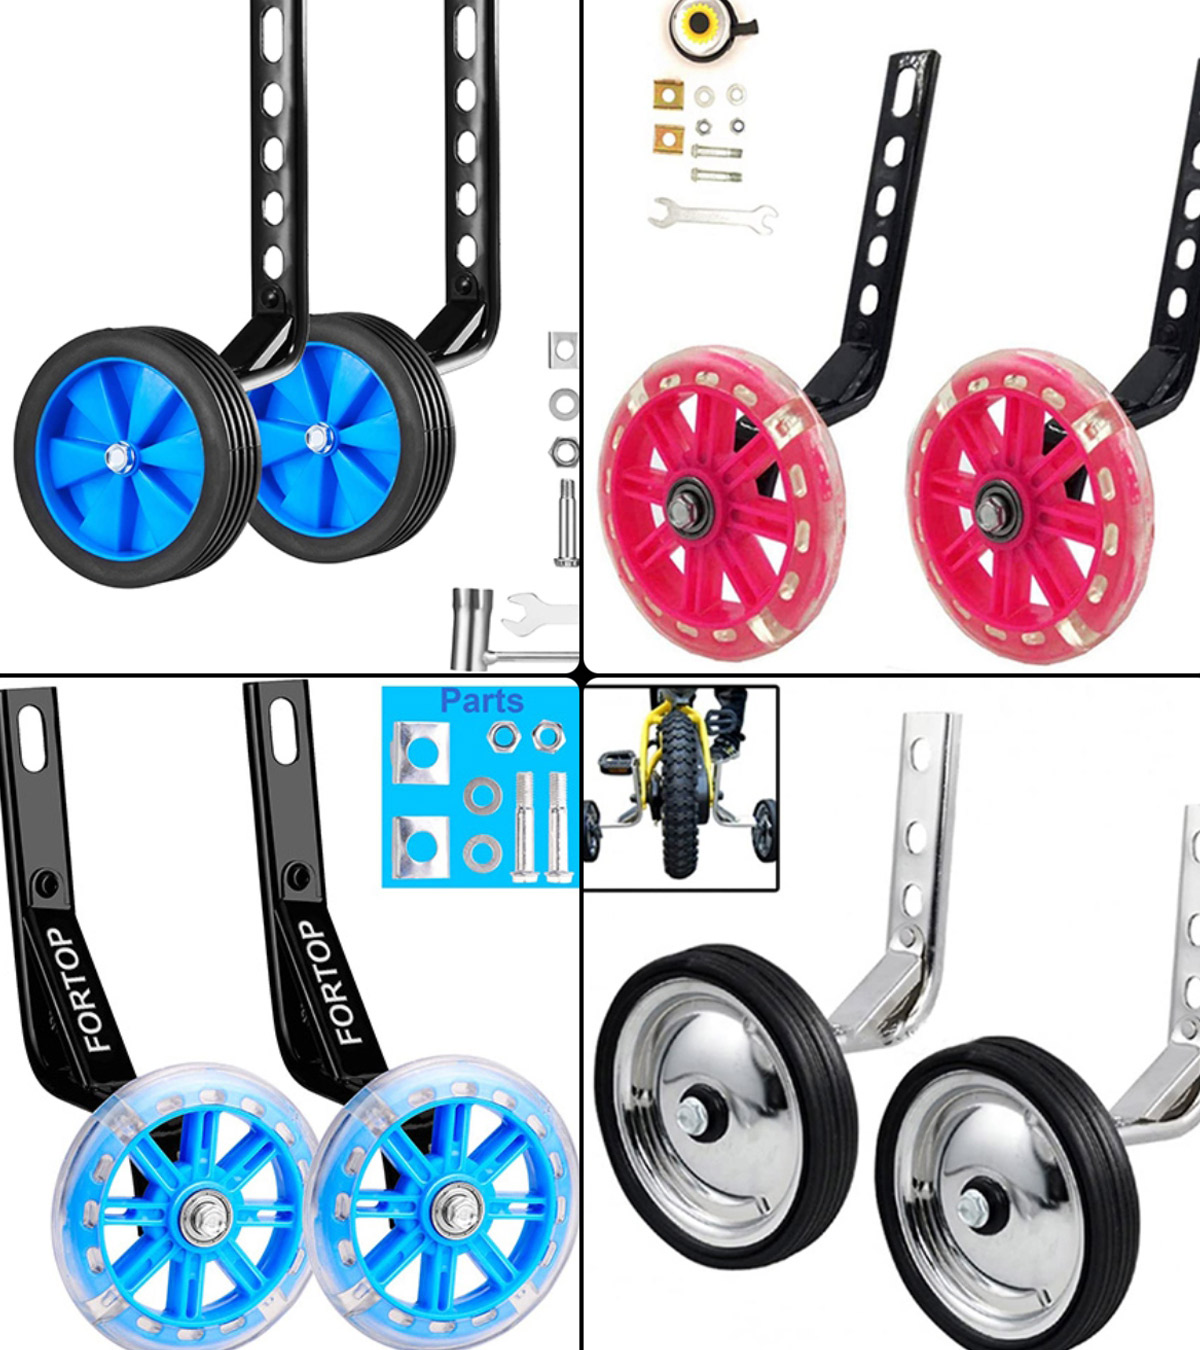 Details about   Kid Training Side Wheels 16"-22" for Children Bicycle BalanceTraining Adjust 